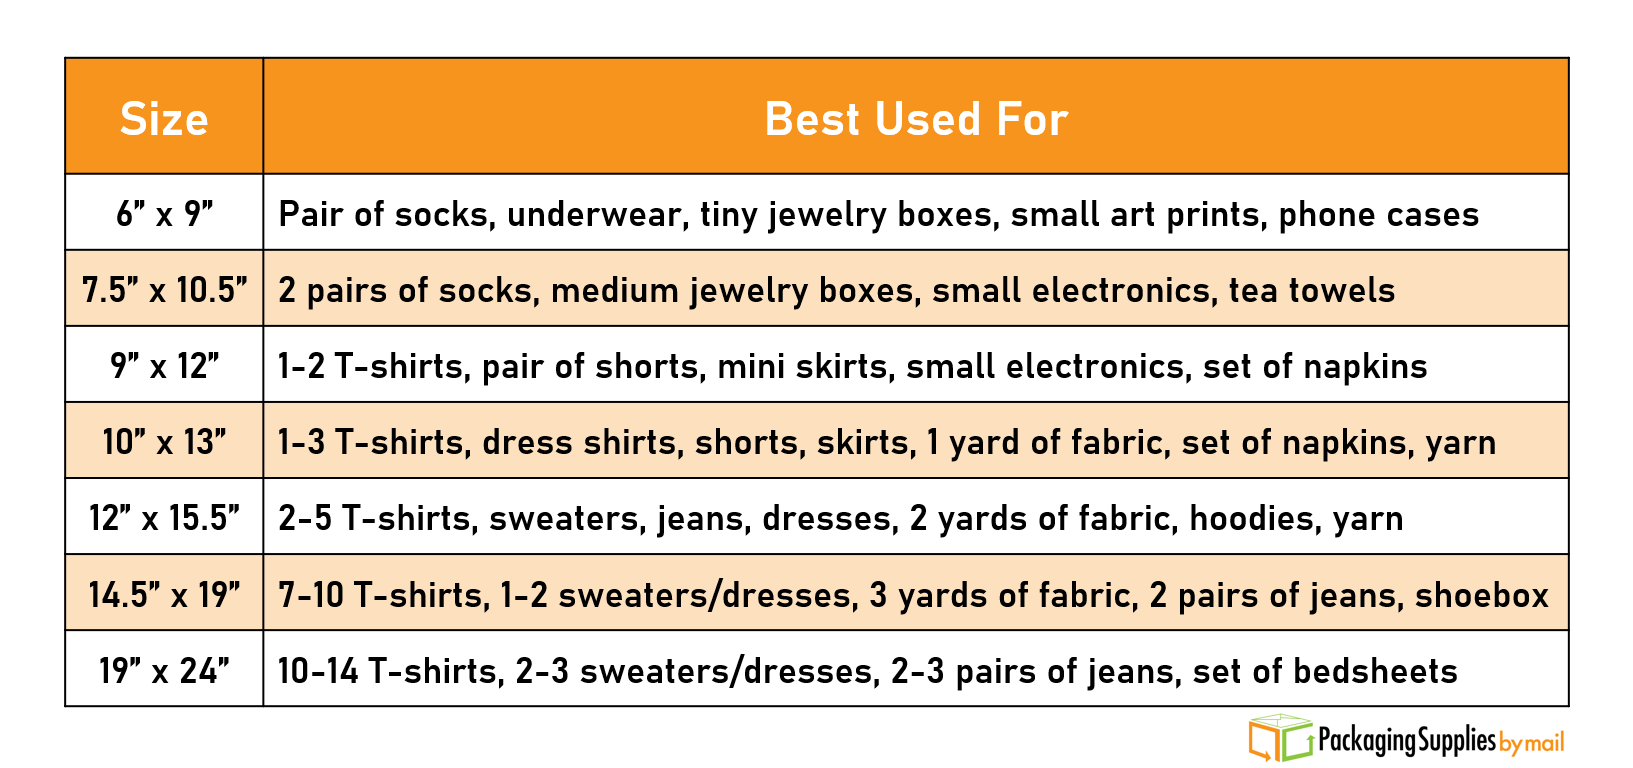 A table showing the best uses of different poly mailer sizes.